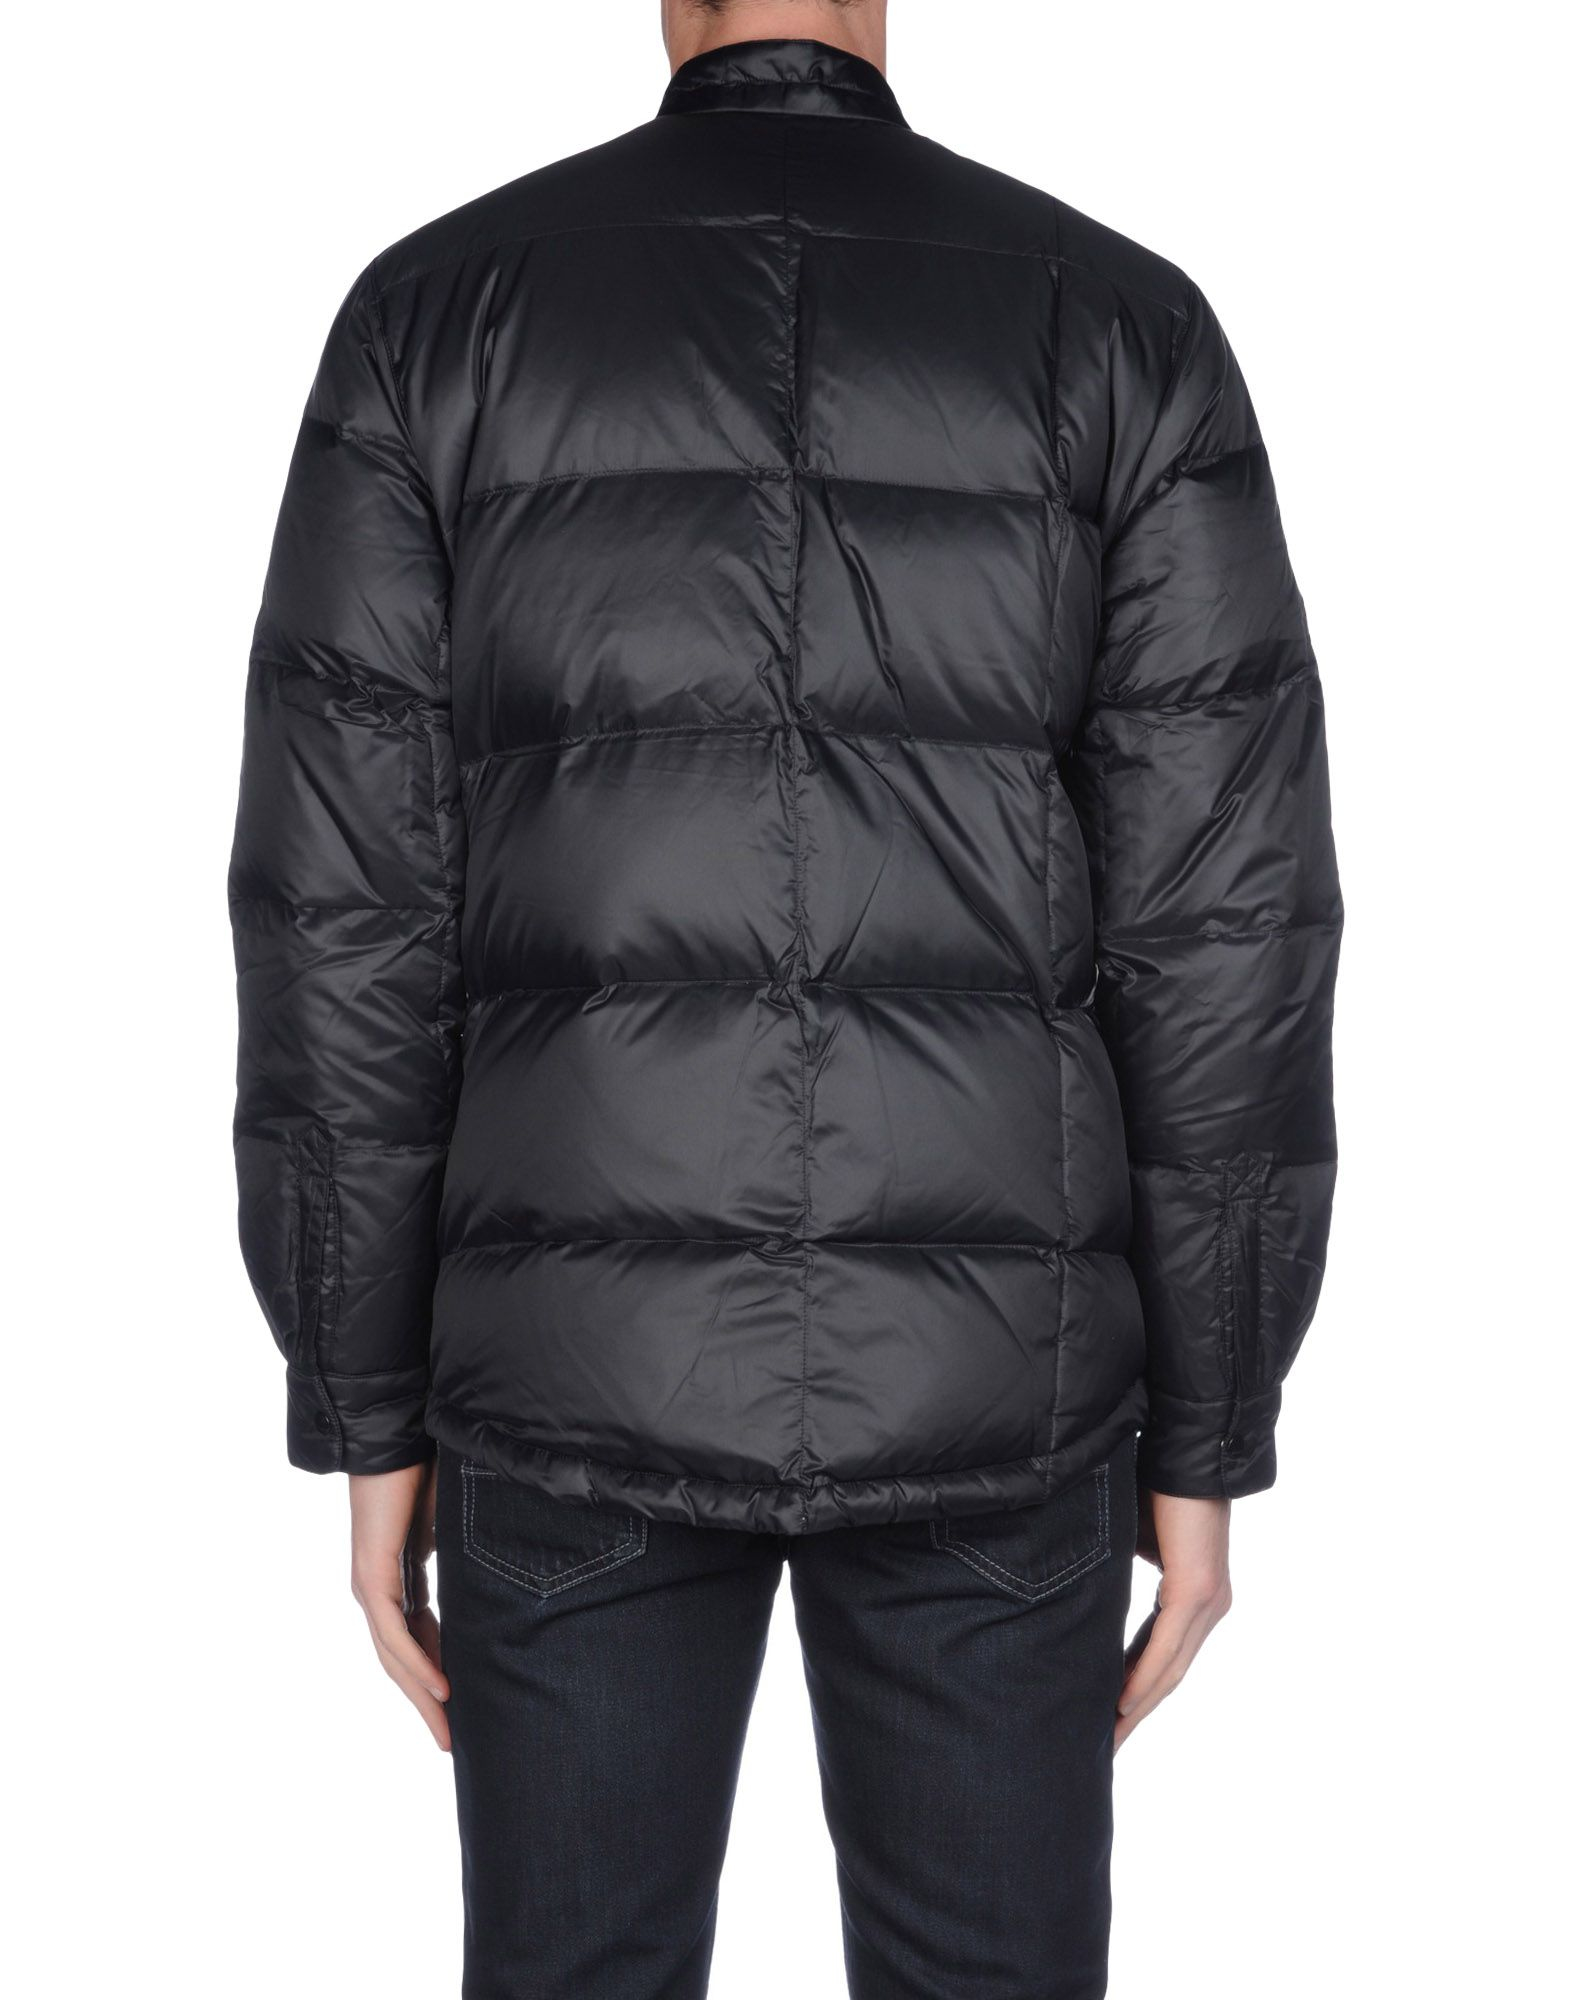 Lyst - Adidas Down Jacket in Black for Men